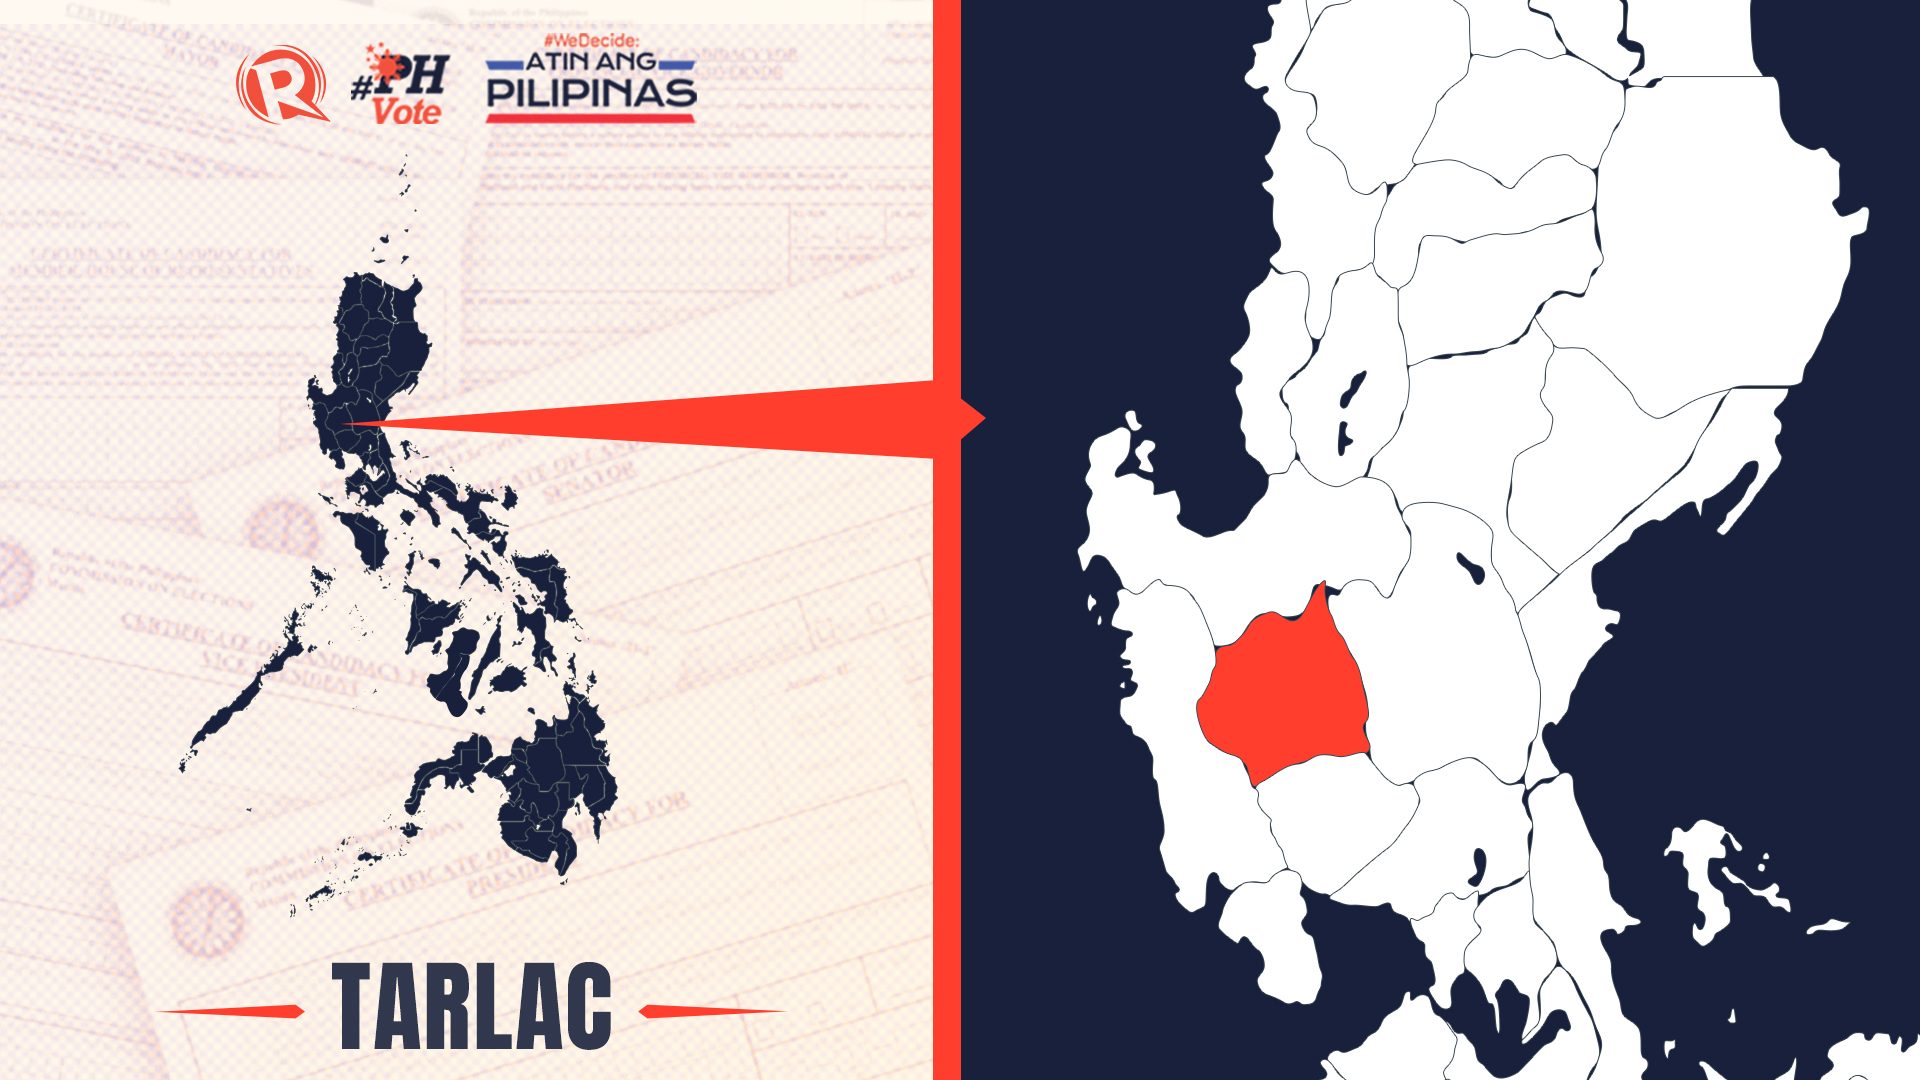 LIST: Who is running in Tarlac in the 2022 Philippine elections?